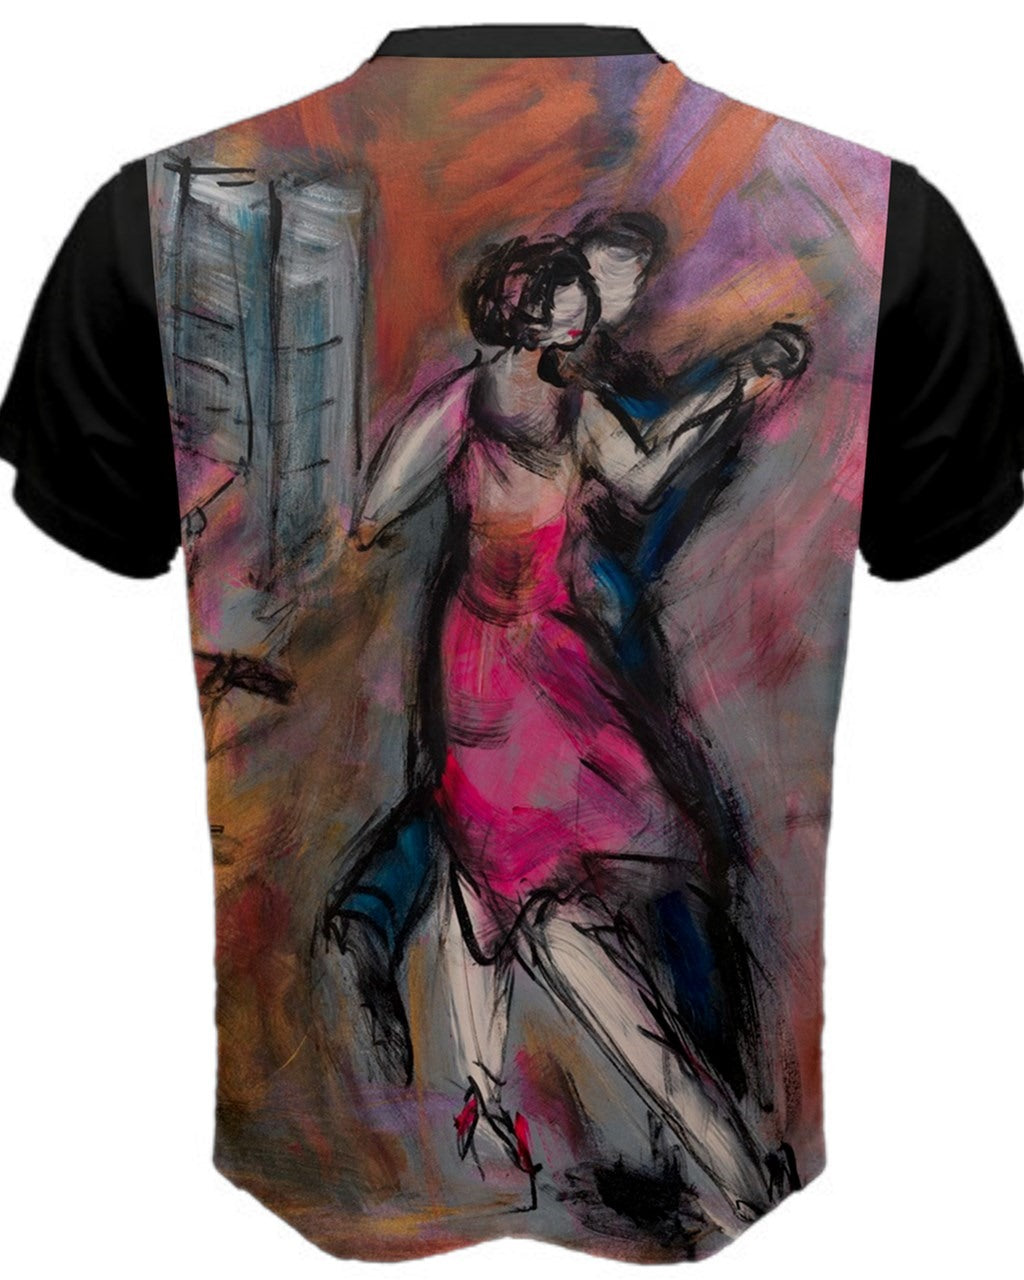 Back view of a vibrant men's  T-shirt featuring original artwork by Leeorah. The design bursts with a kaleidoscope of colors, blending seamlessly to create a captivating visual display. Available in a range of sizes to suit all body types, this T-shirt is a bold statement piece for any wardrobe